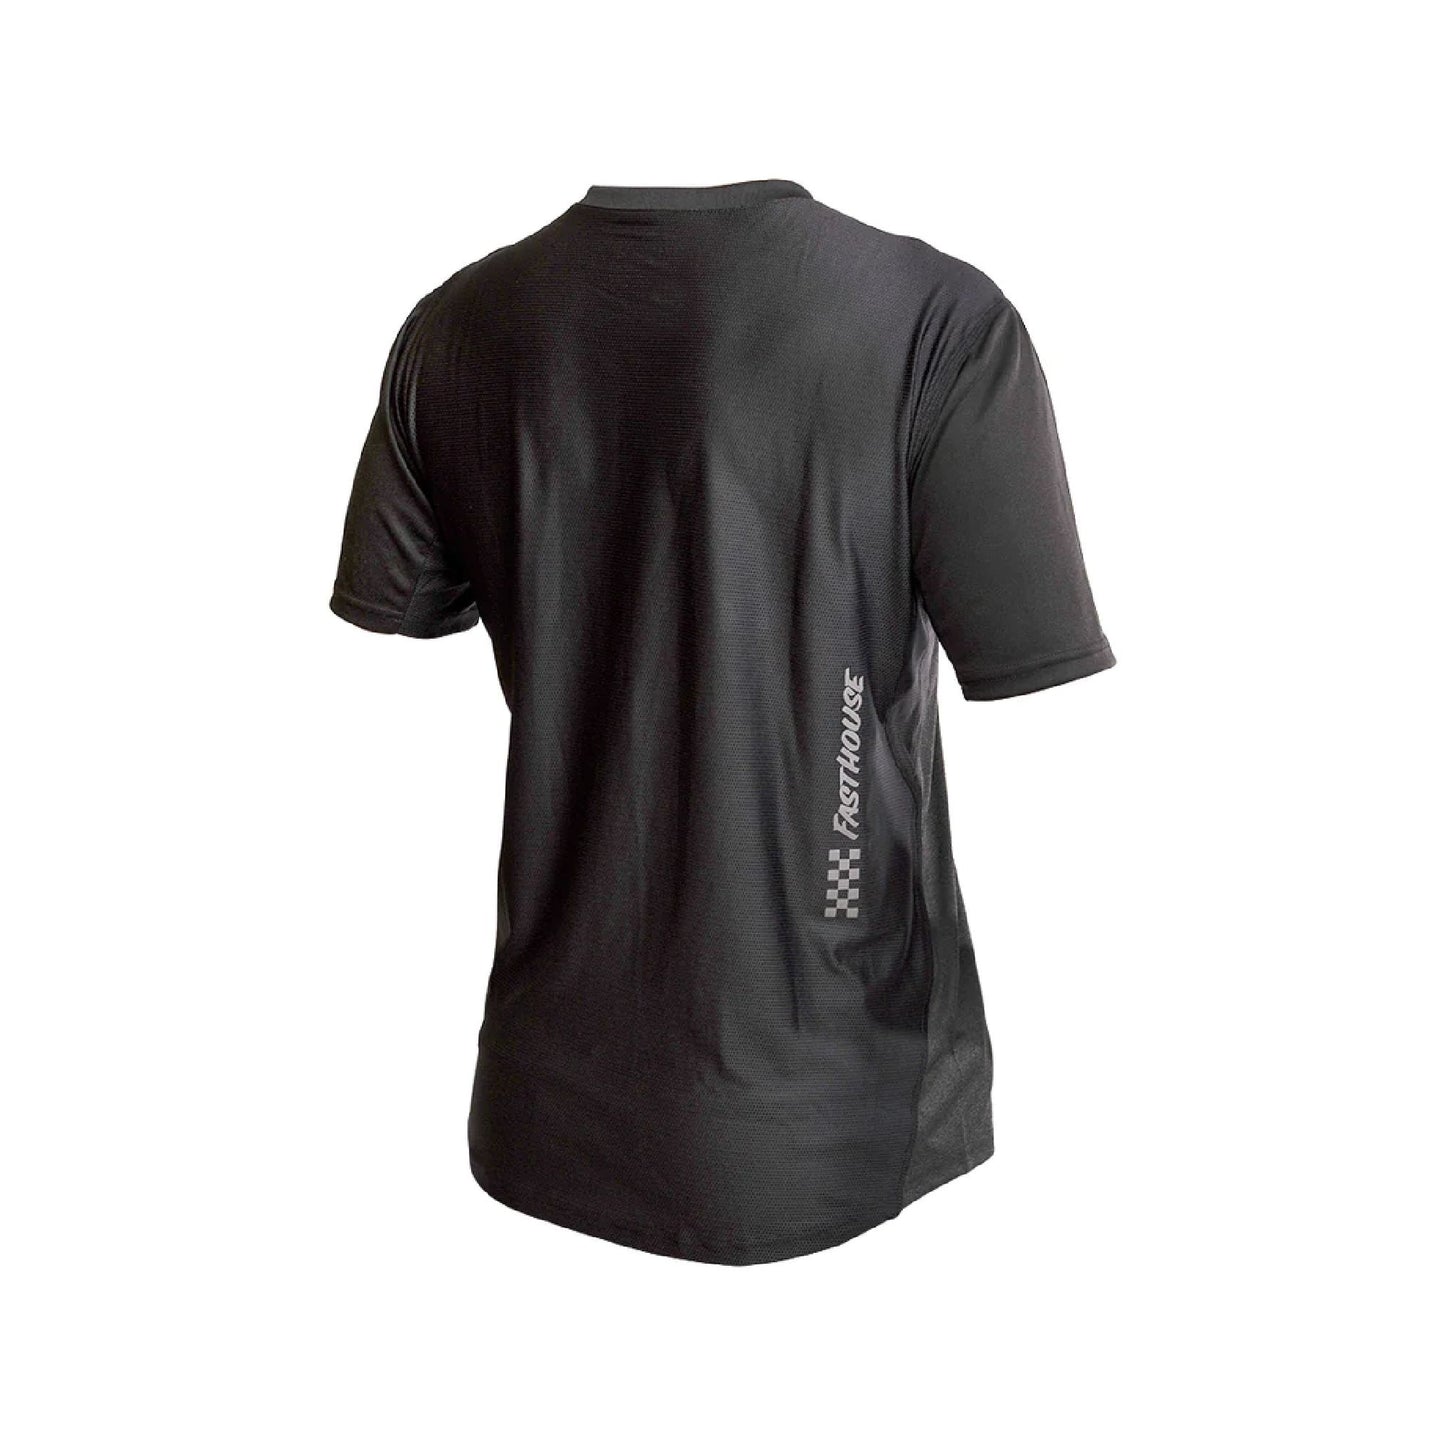 Fasthouse Youth Alloy Mesa SS Jersey Heather Charcoal Black - Fasthouse Bike Jerseys